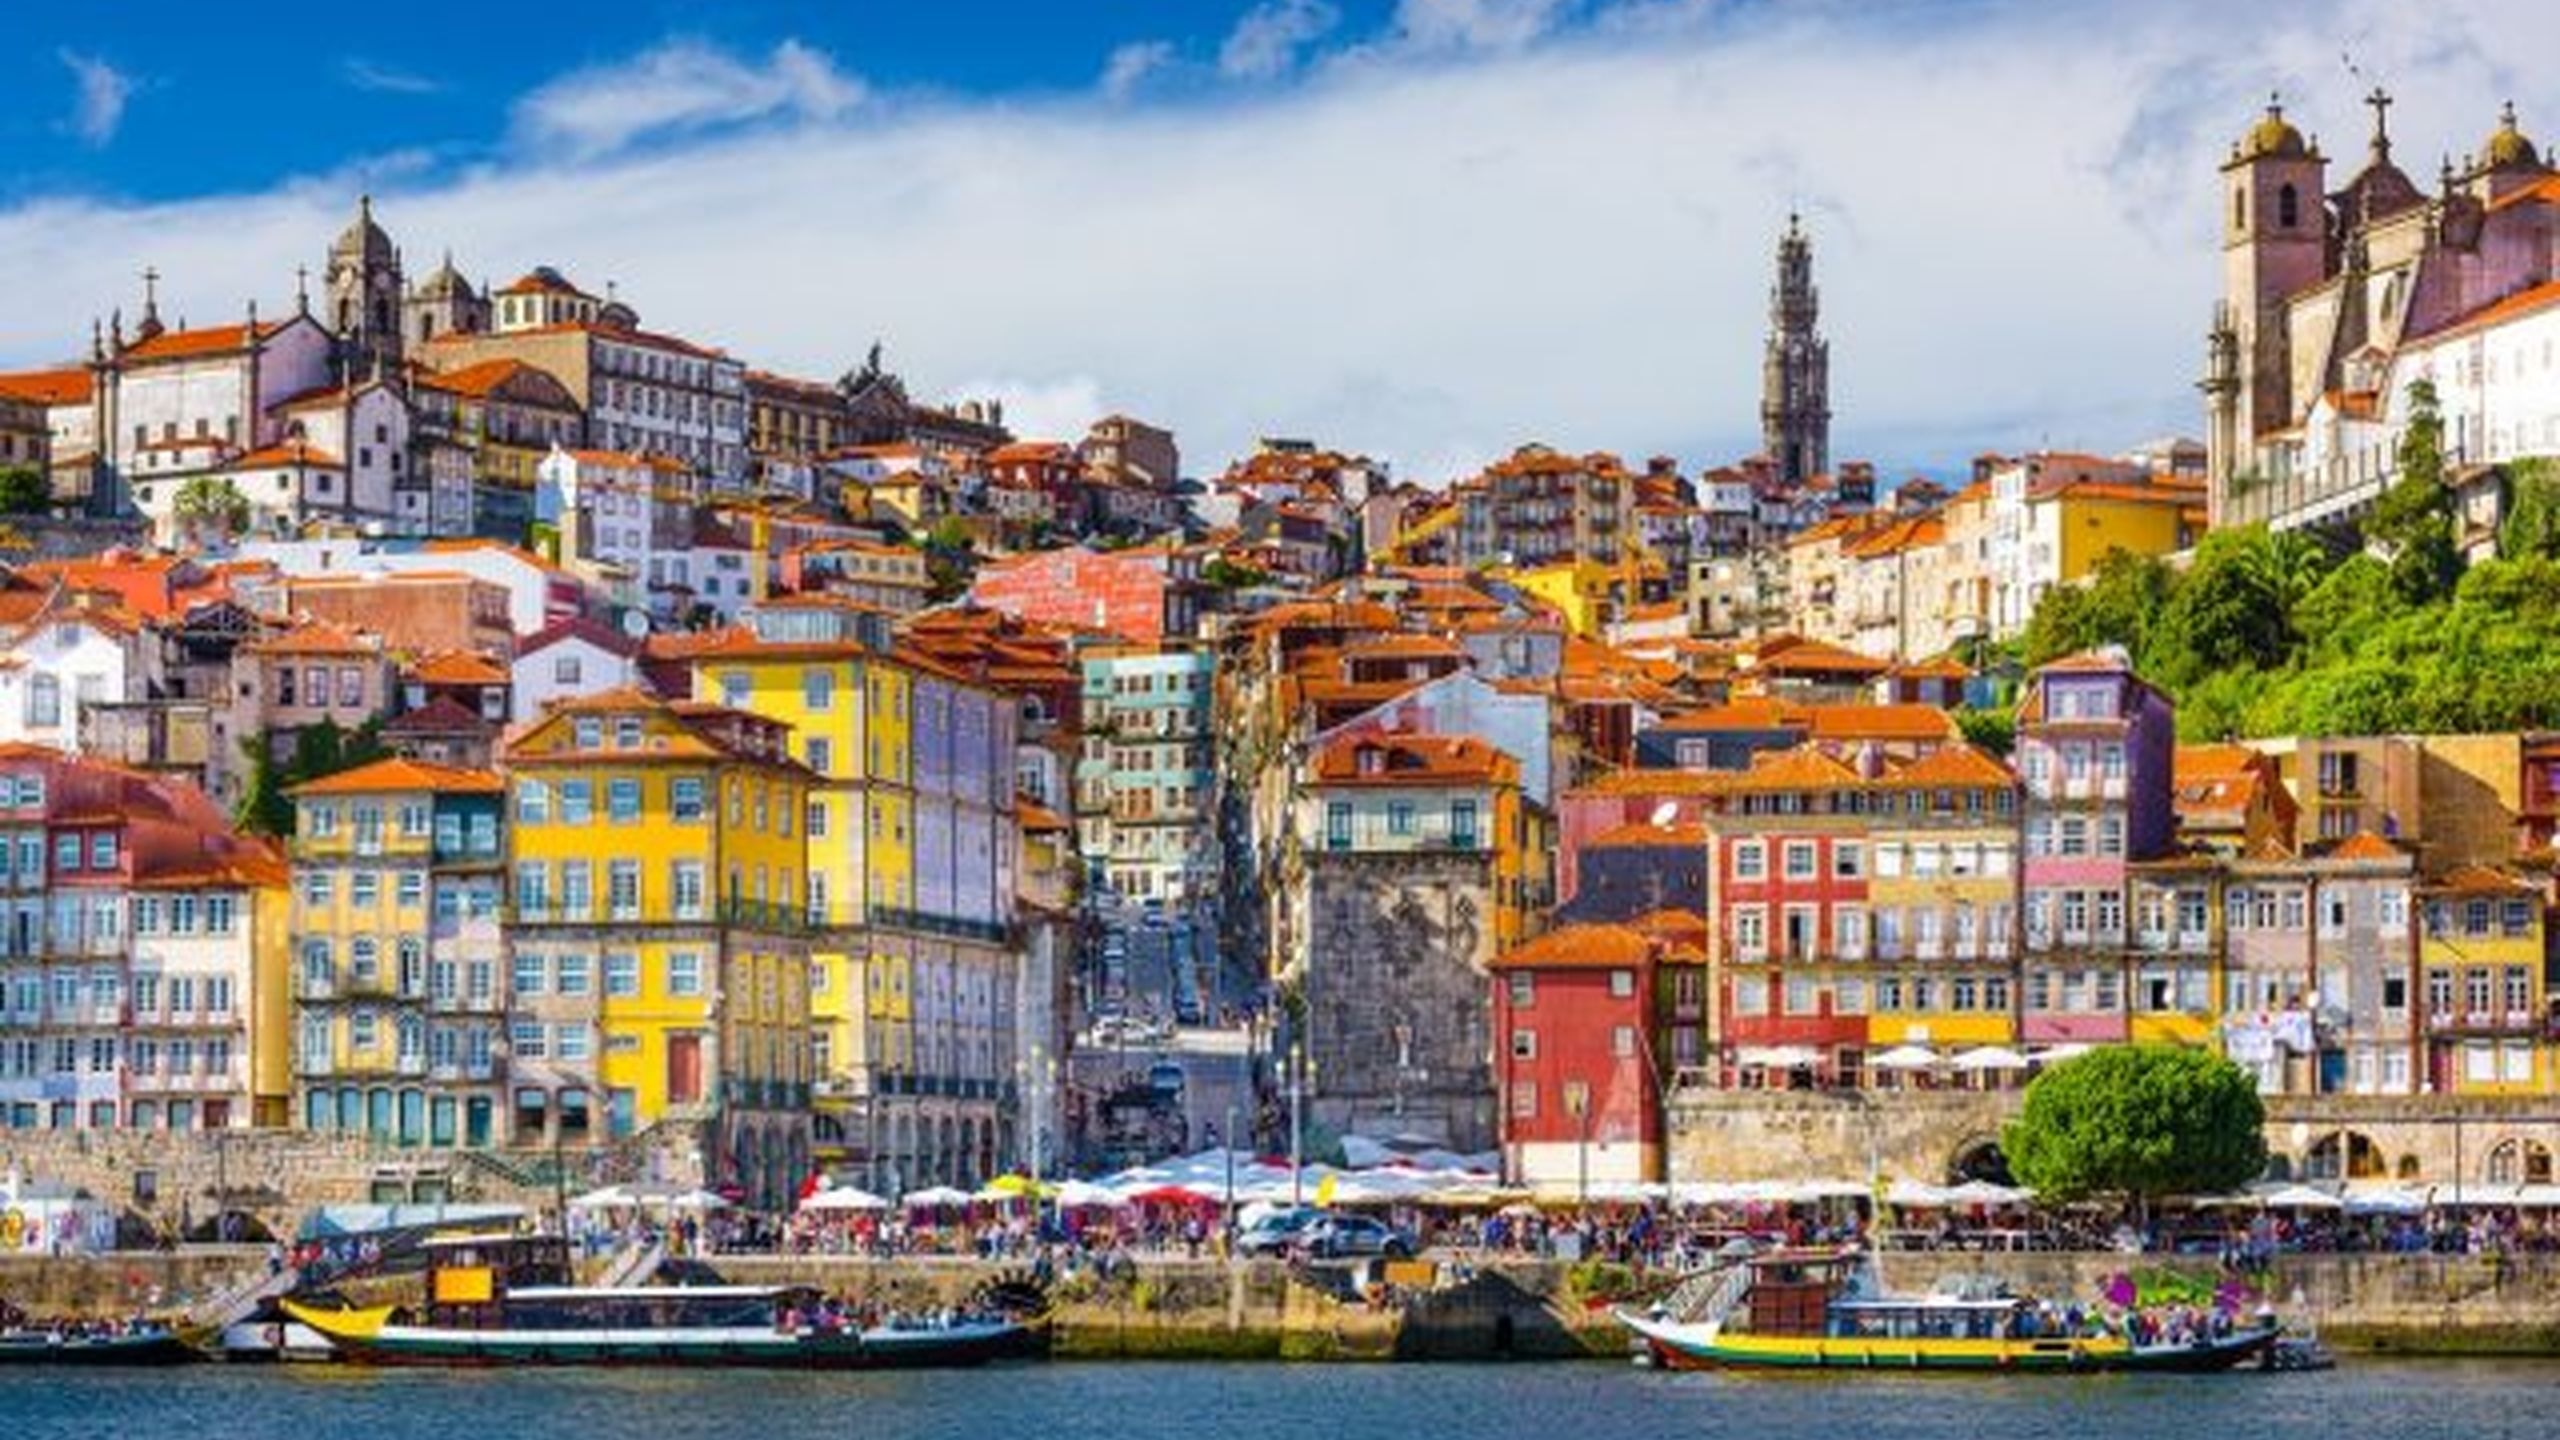 Porto will host next GIE event about the wind industry